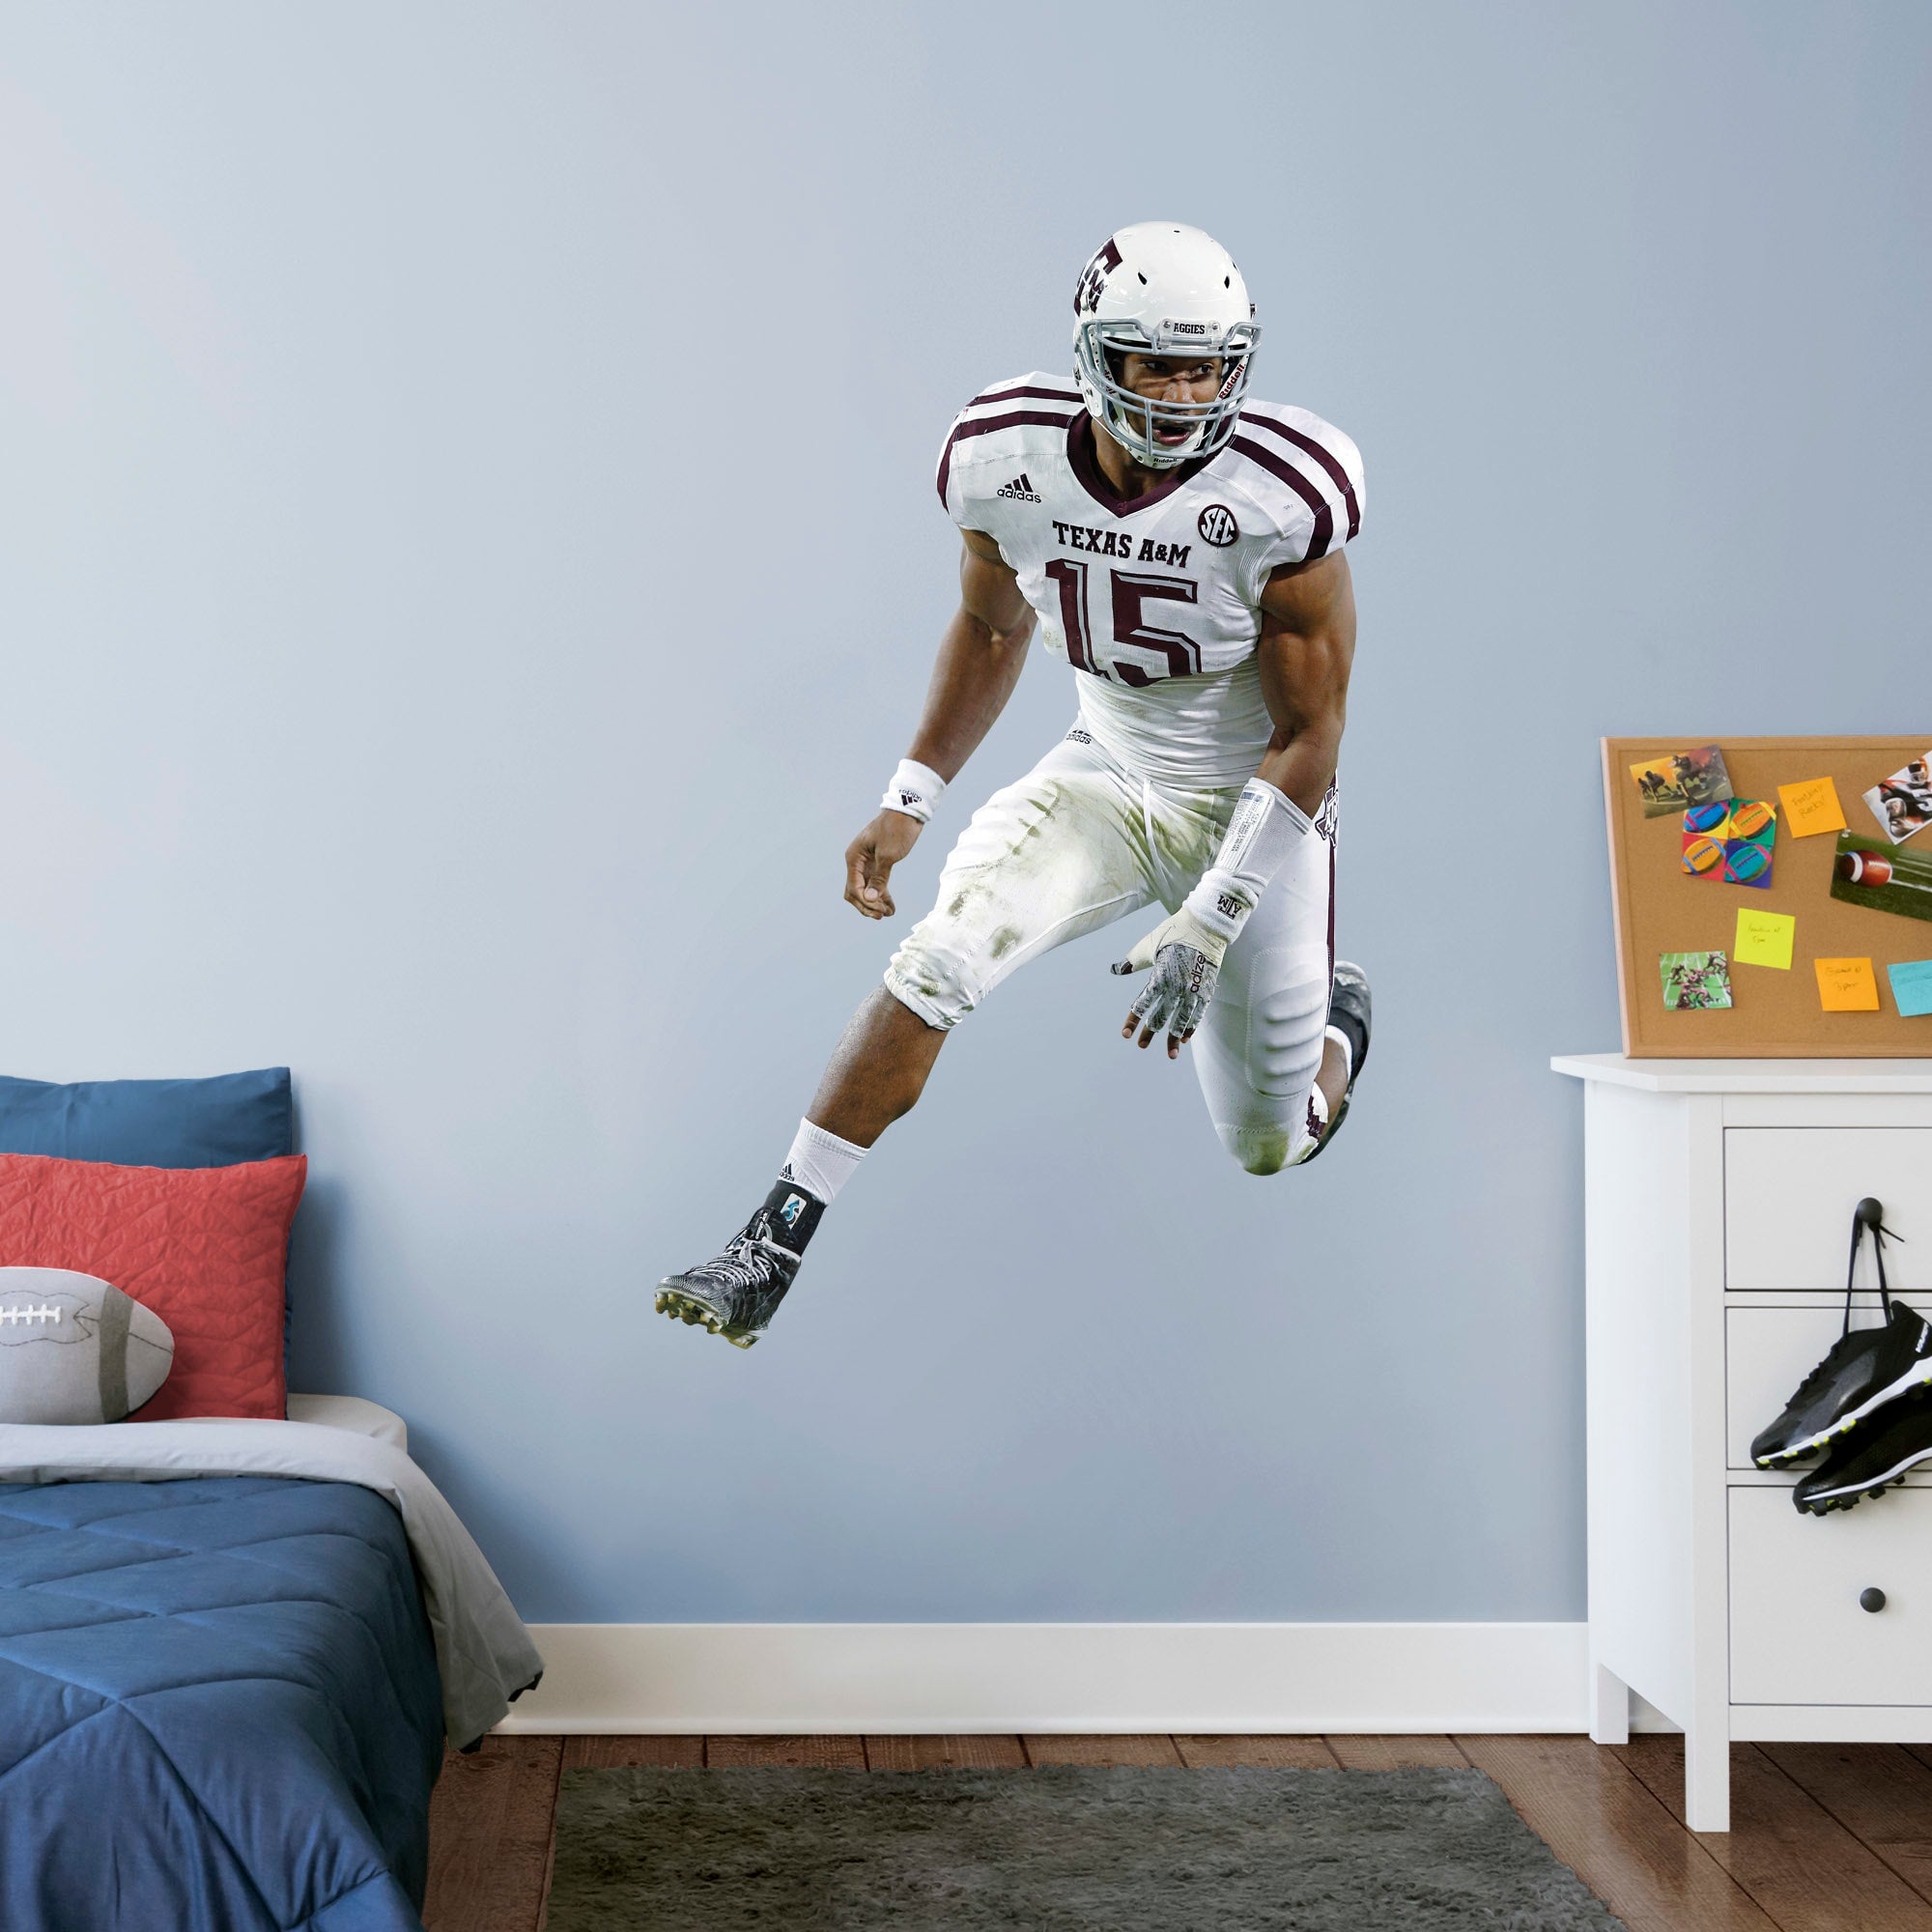 Myles Garrett for Texas A&M Aggies: Texas A&M - Officially Licensed Removable Wall Decal Giant Athlete + 2 Decals (33"W x 51"H)